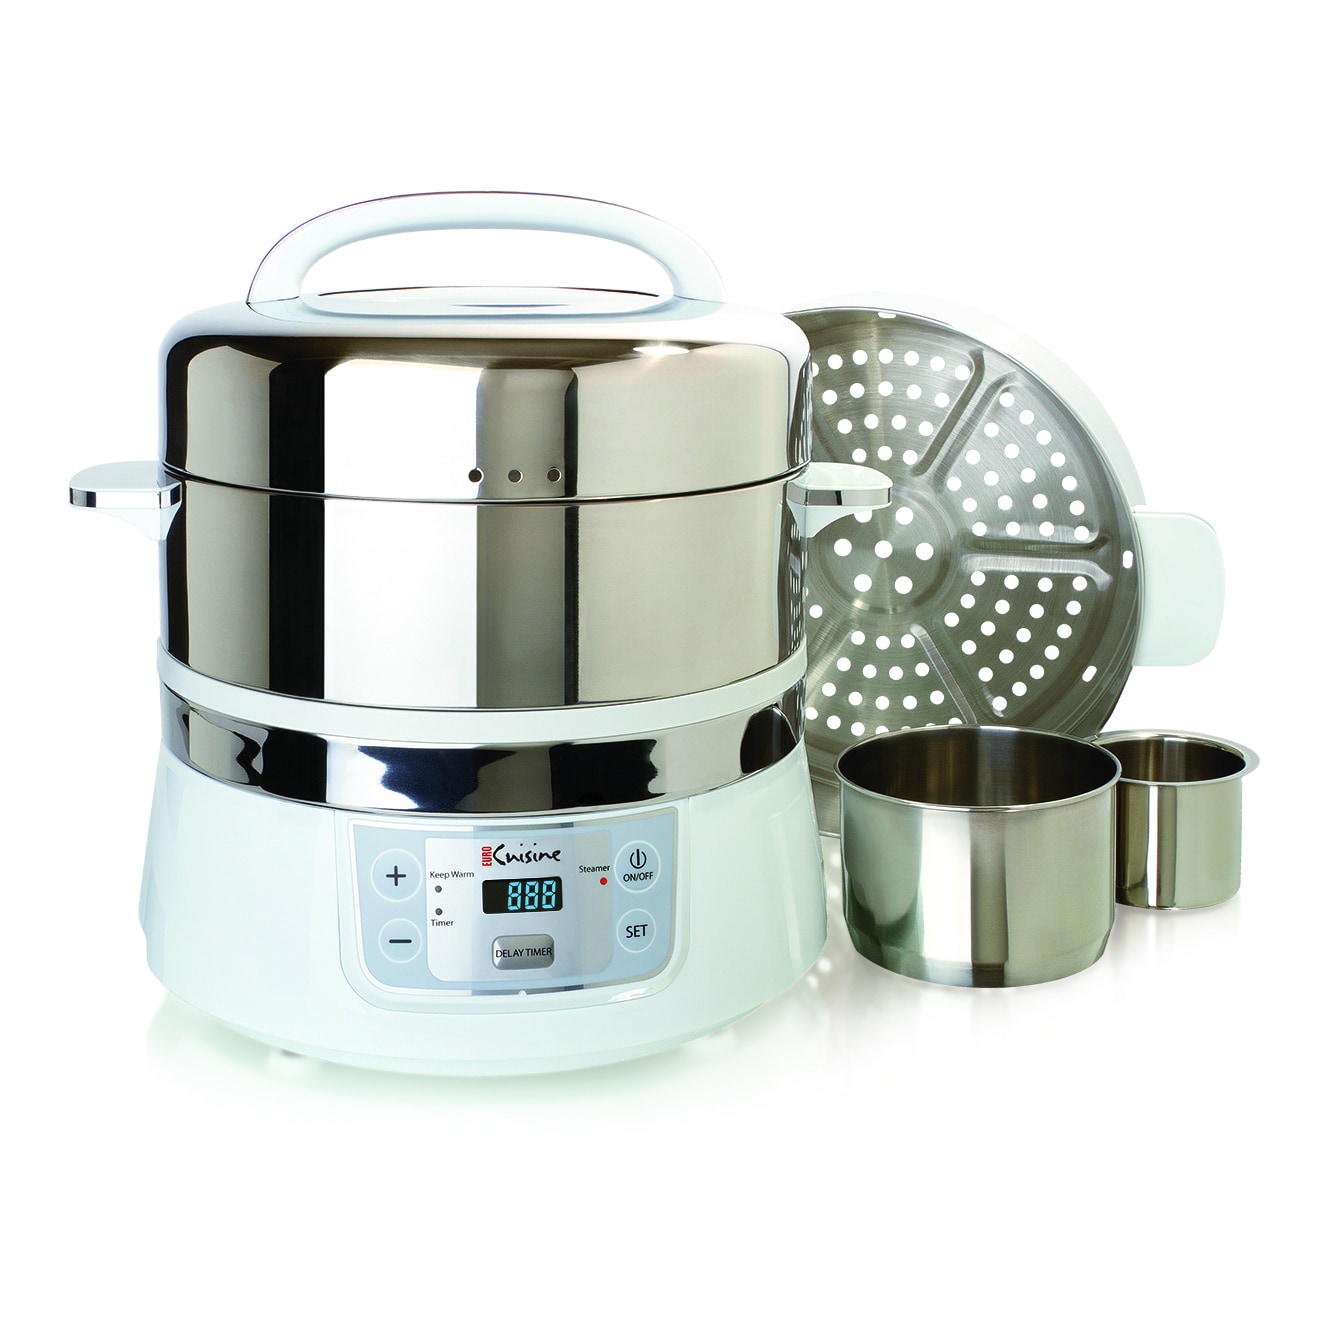 https://ak1.ostkcdn.com/images/products/10845288/Euro-Cuisine-FS2500-Stainless-Steel-Electric-Food-Steamer-3110e4d5-efee-4340-a7c7-3d4b715a715d.jpg